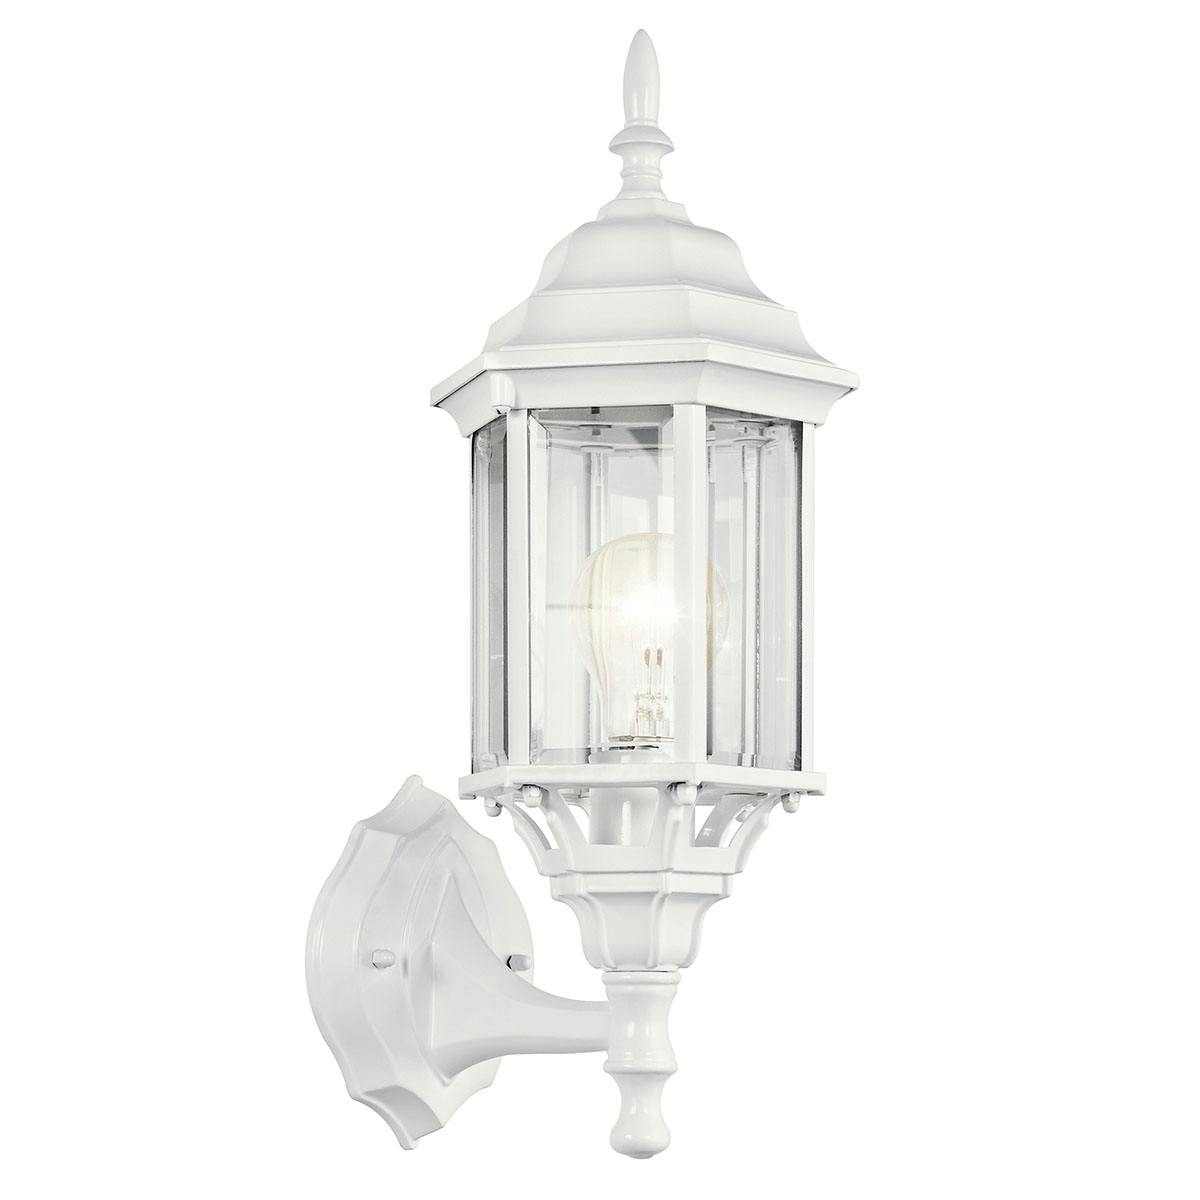 Chesapeake 17" Wall Light in White on a white background